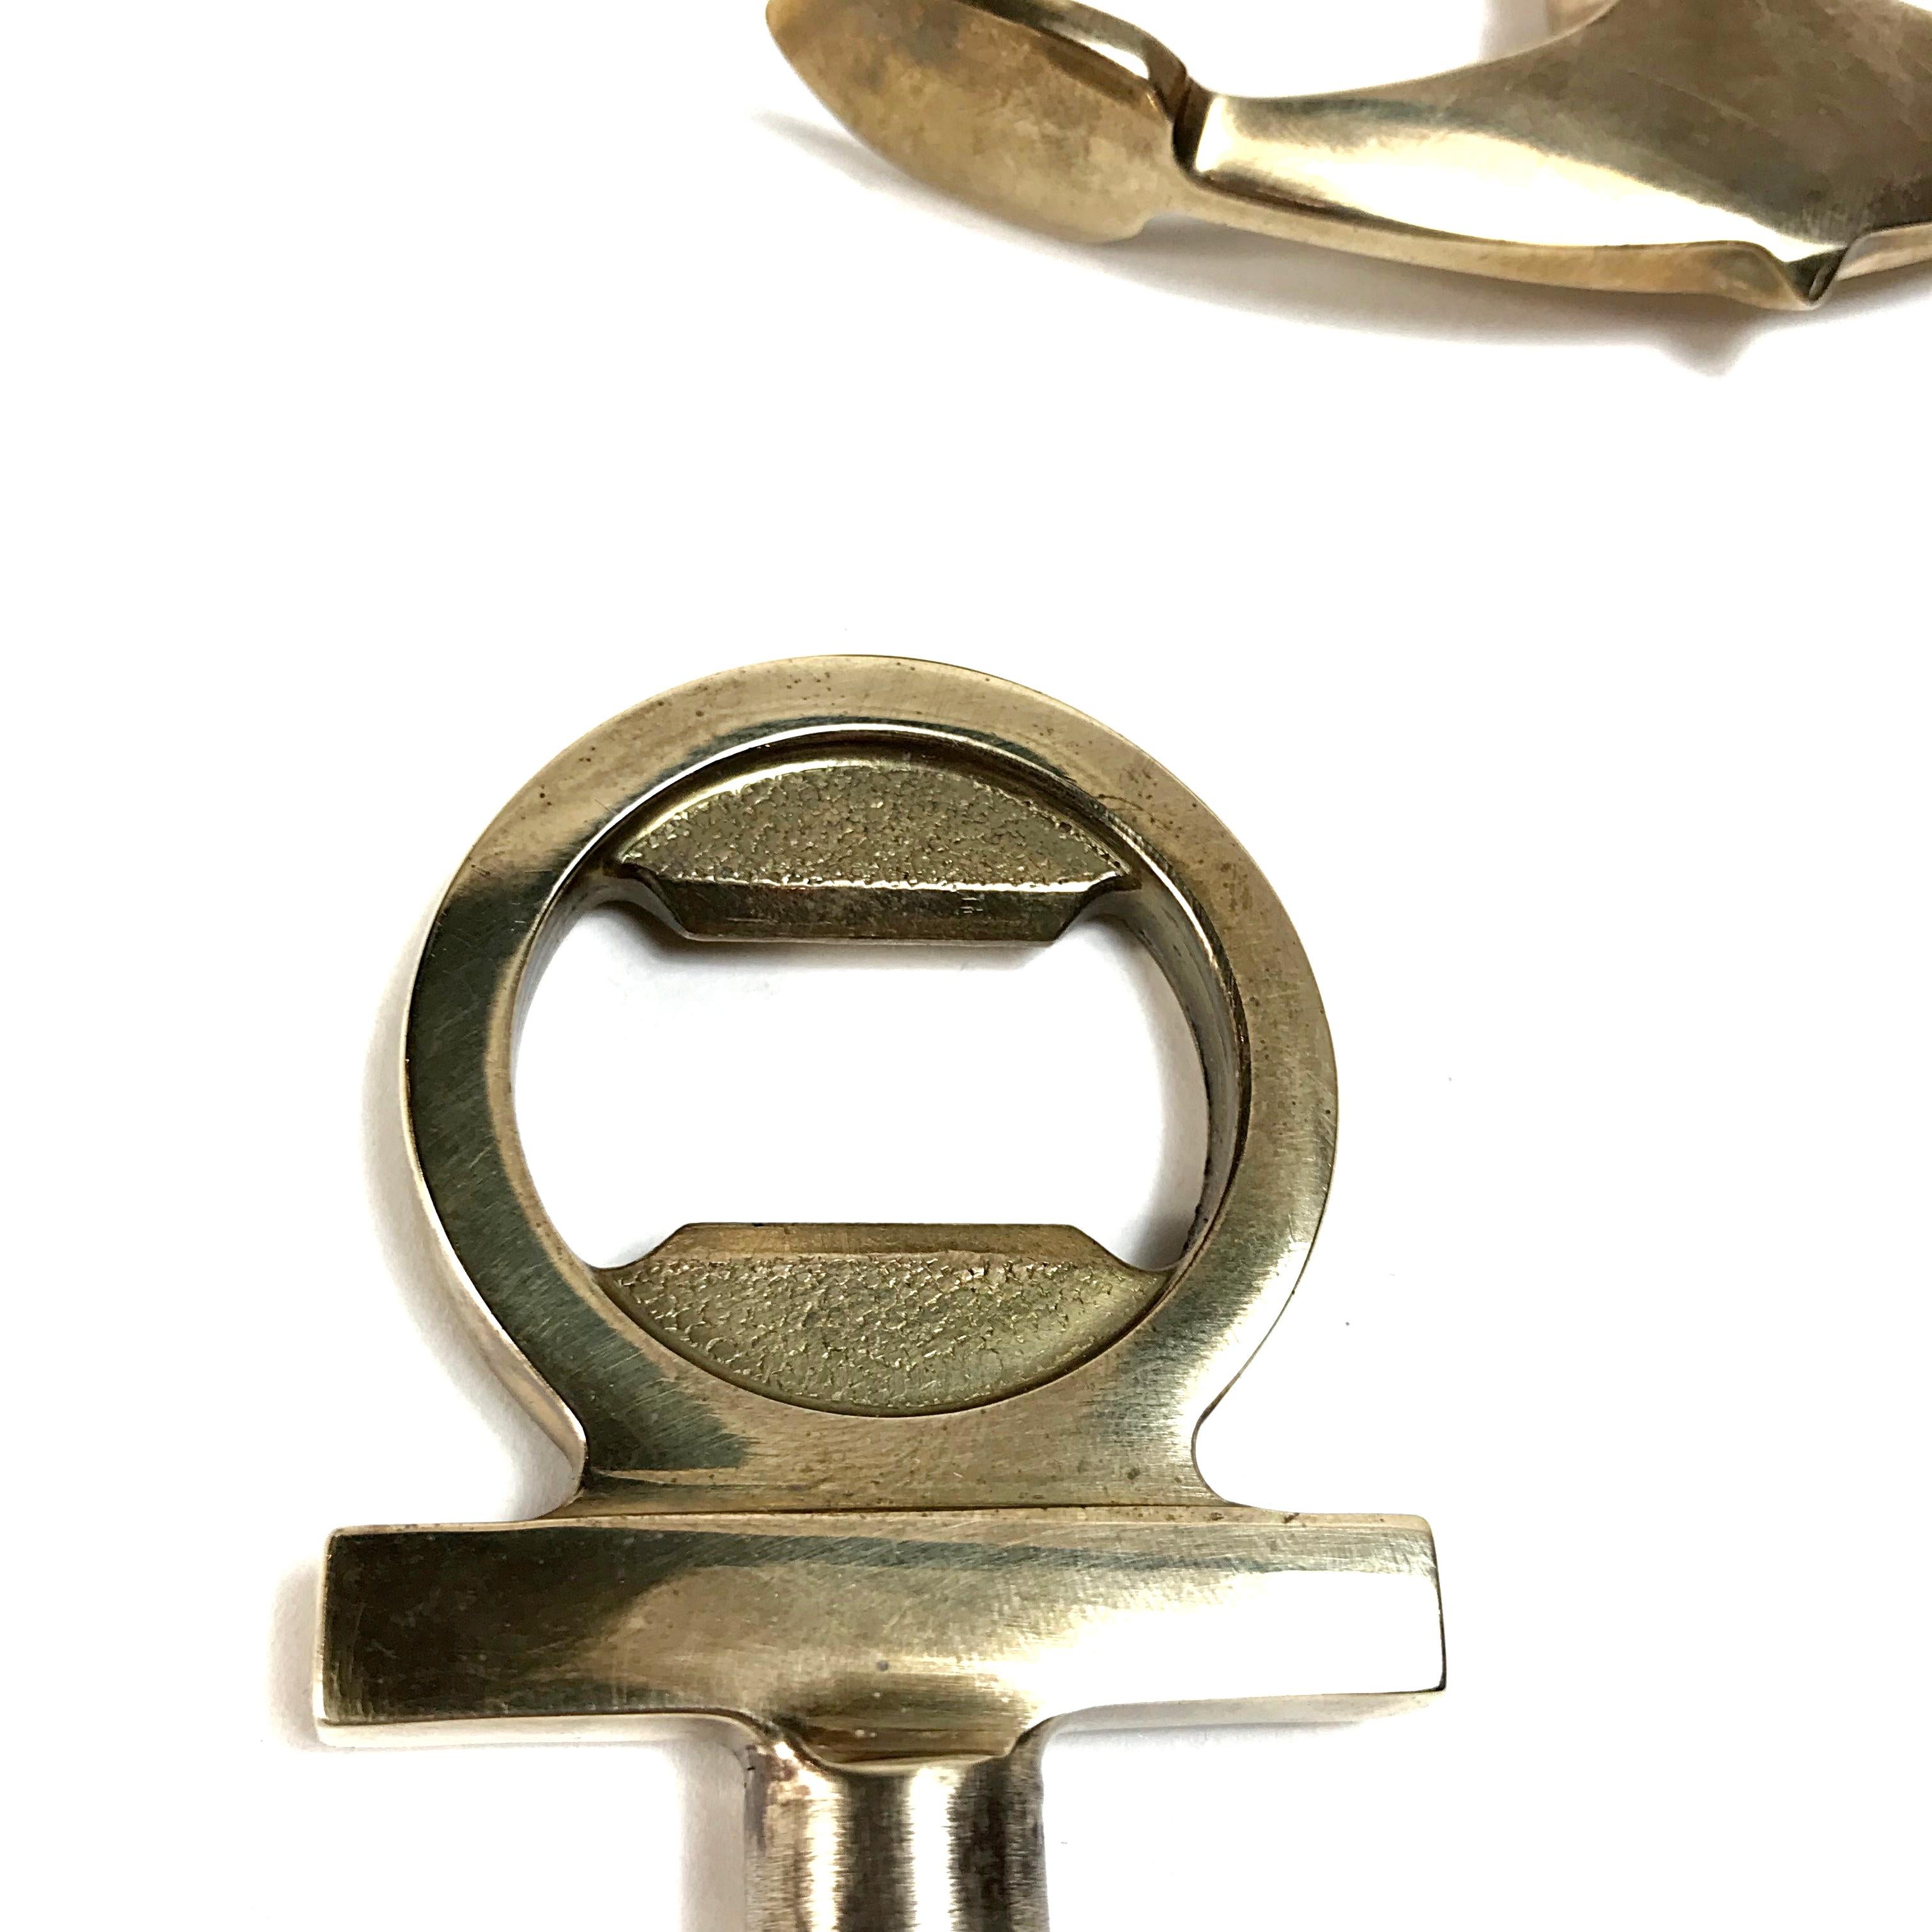 French Provincial Midcentury Auböck Style Solid Brass Anchor Wine Bottle Opener, 1950s, Germany